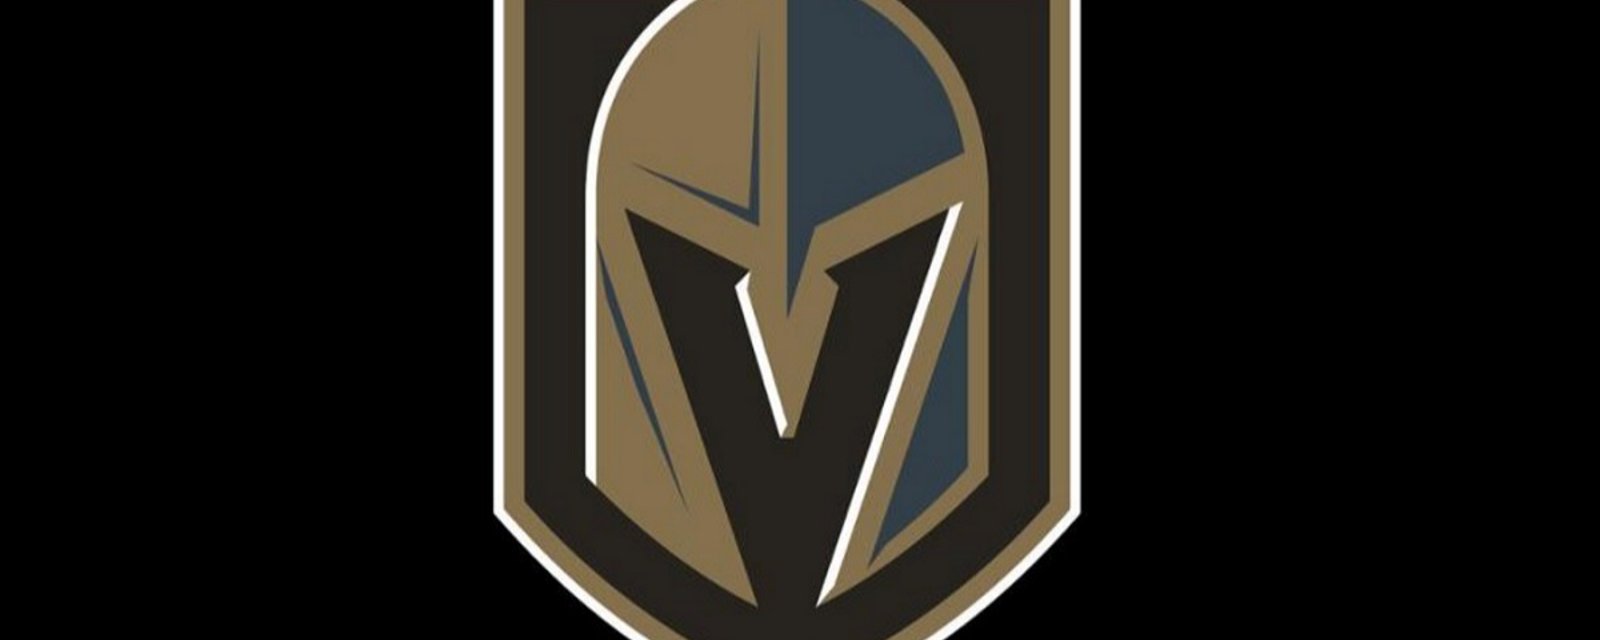 Breaking: Golden Knights have lost a player to injury. 